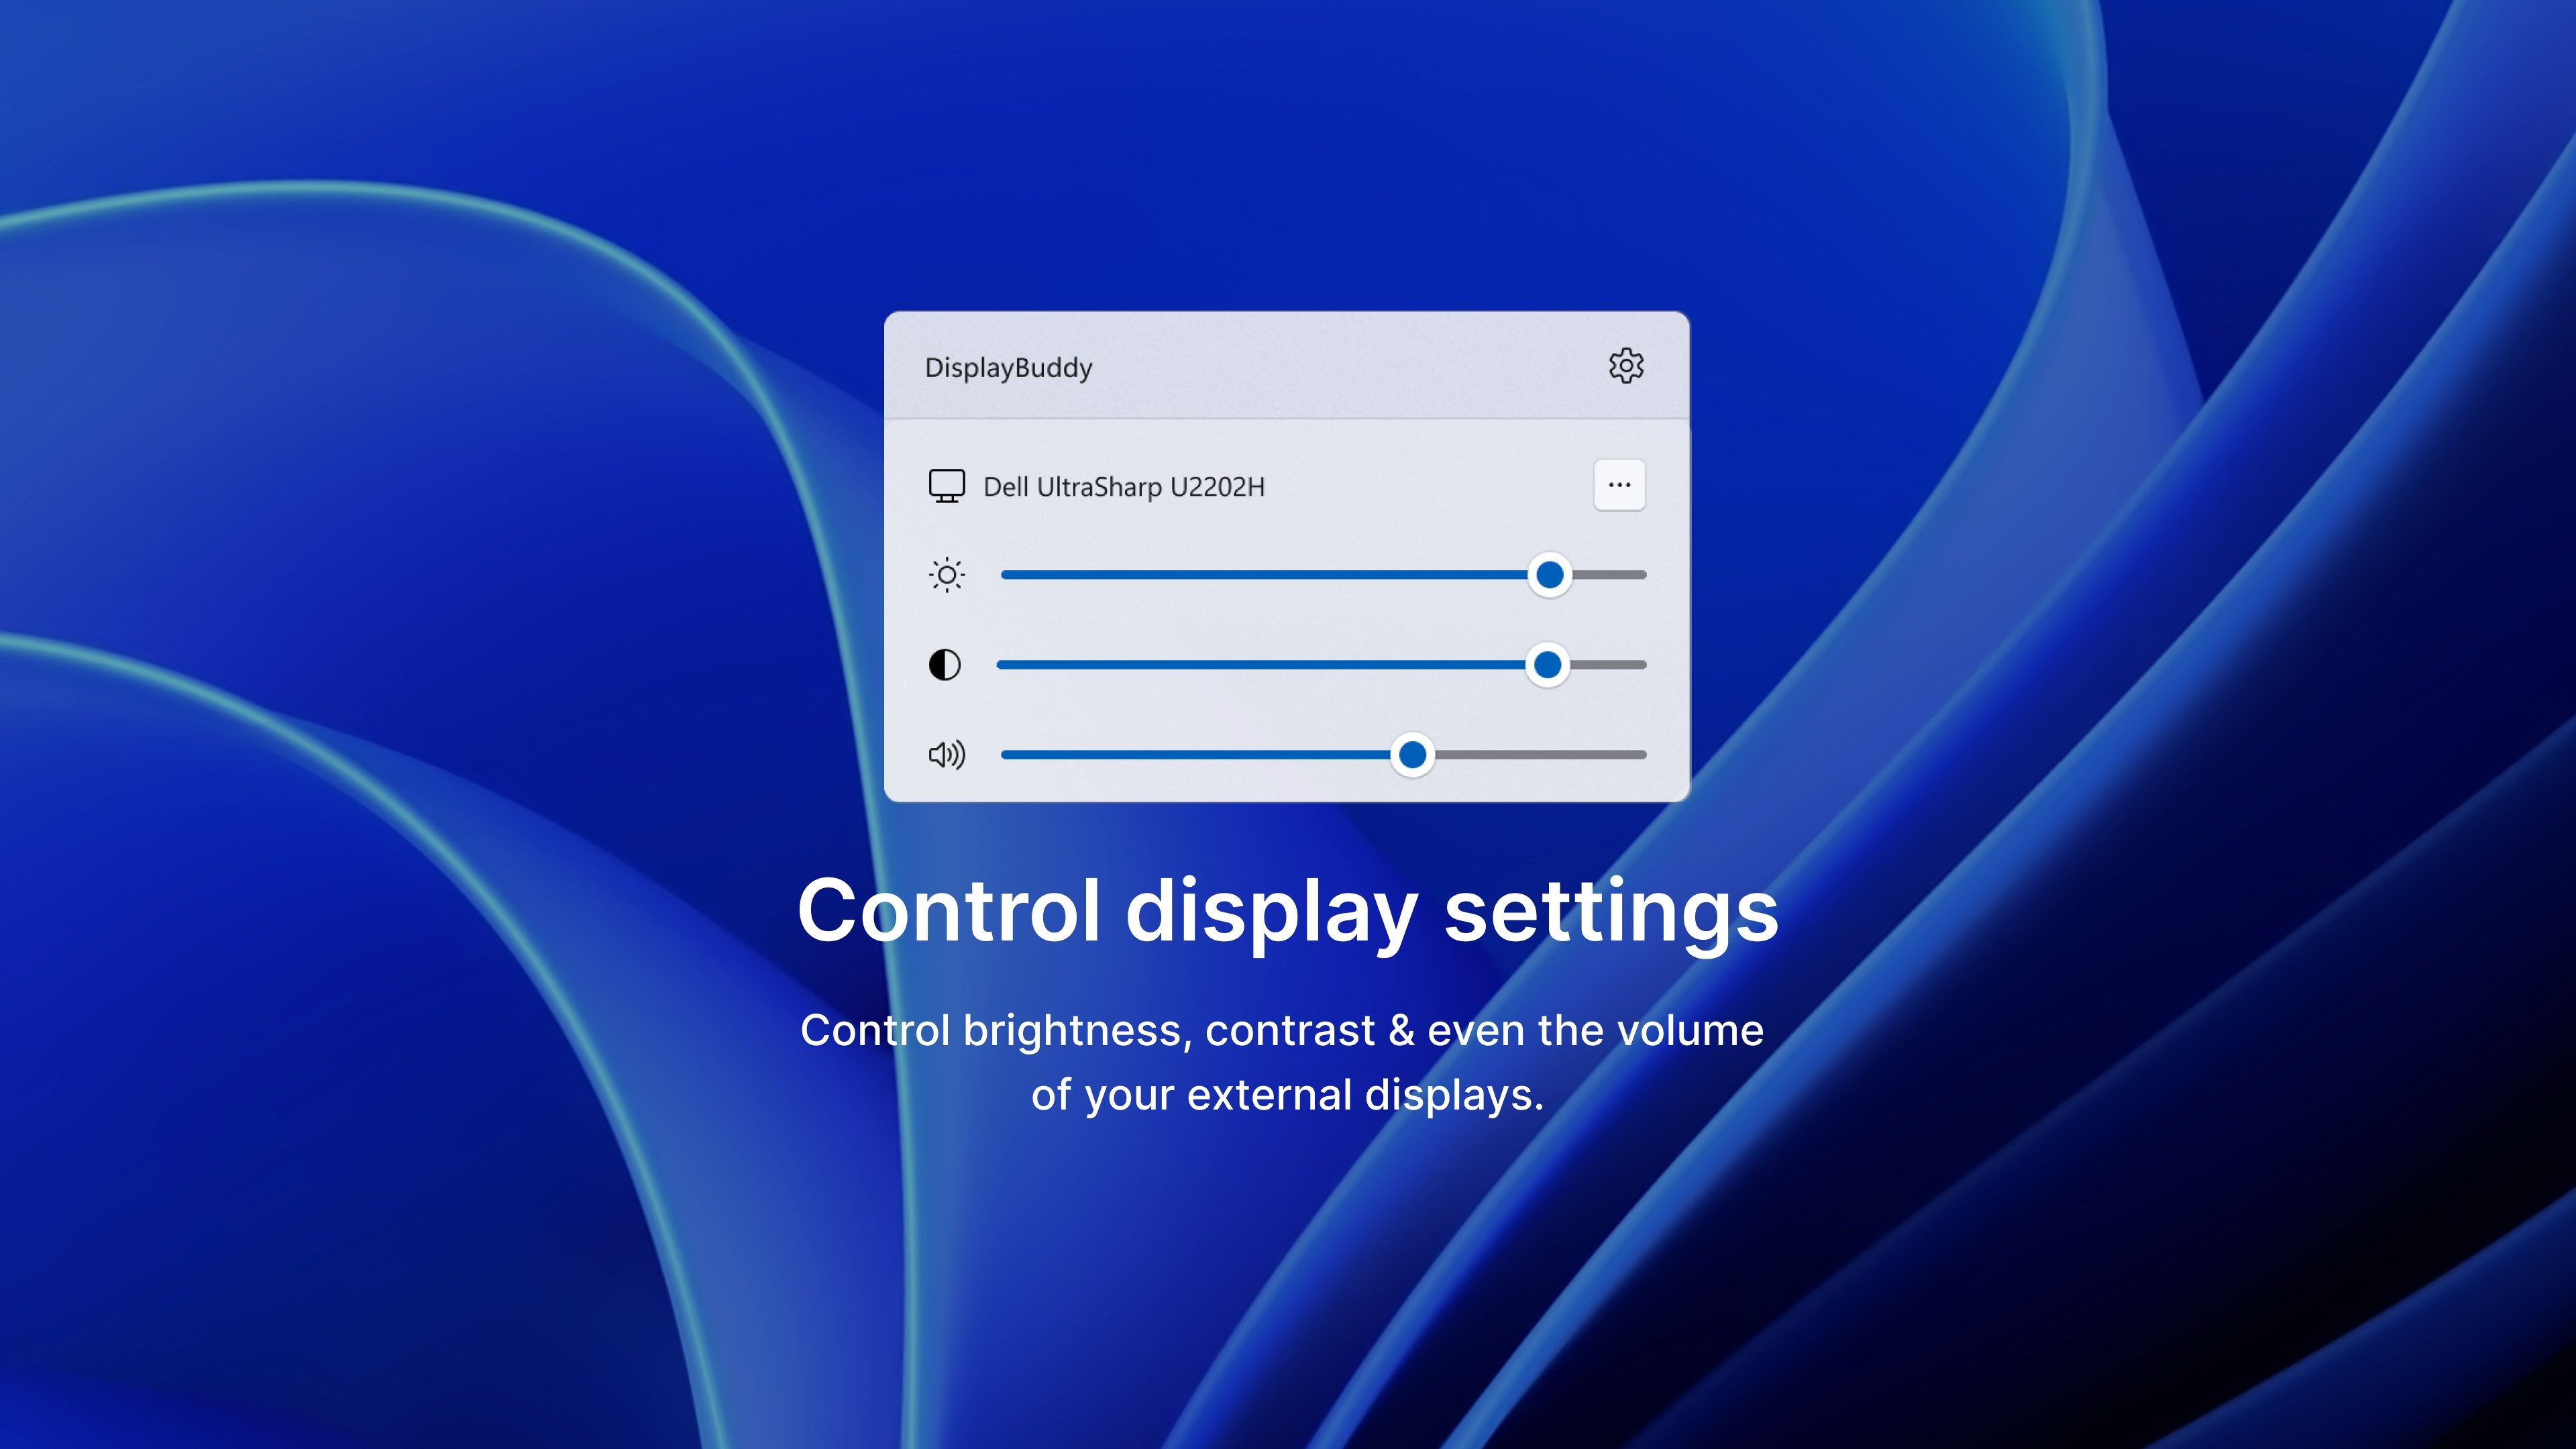 Control the brightness, contrast and even volume of monitors with built-in speakers by just moving the sliders.